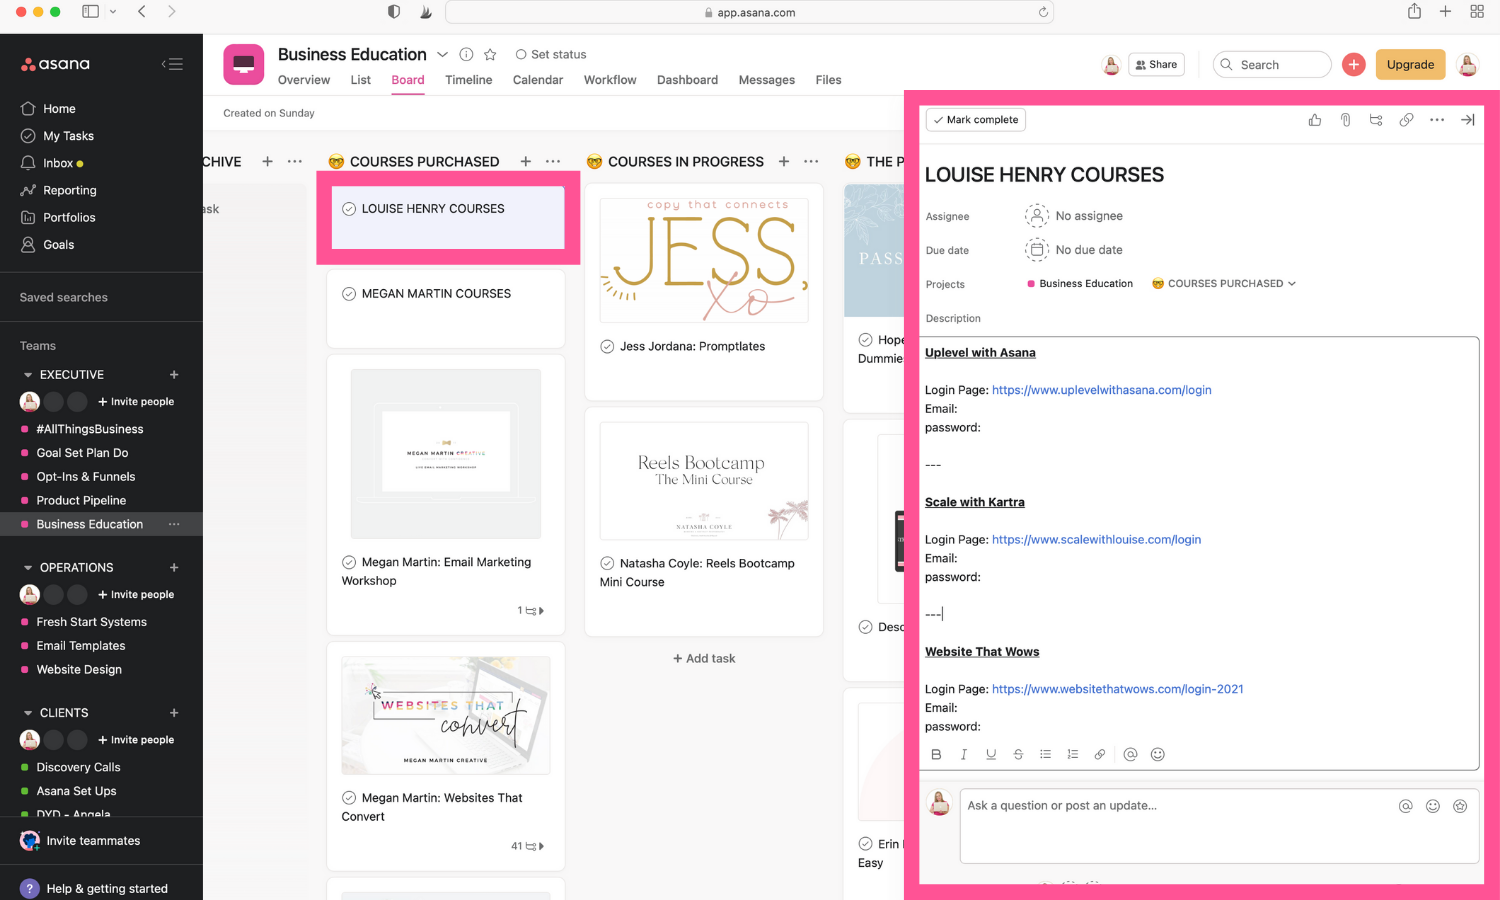 screenshot of my business education project in asana showing a course creator placeholder card and description with course login details